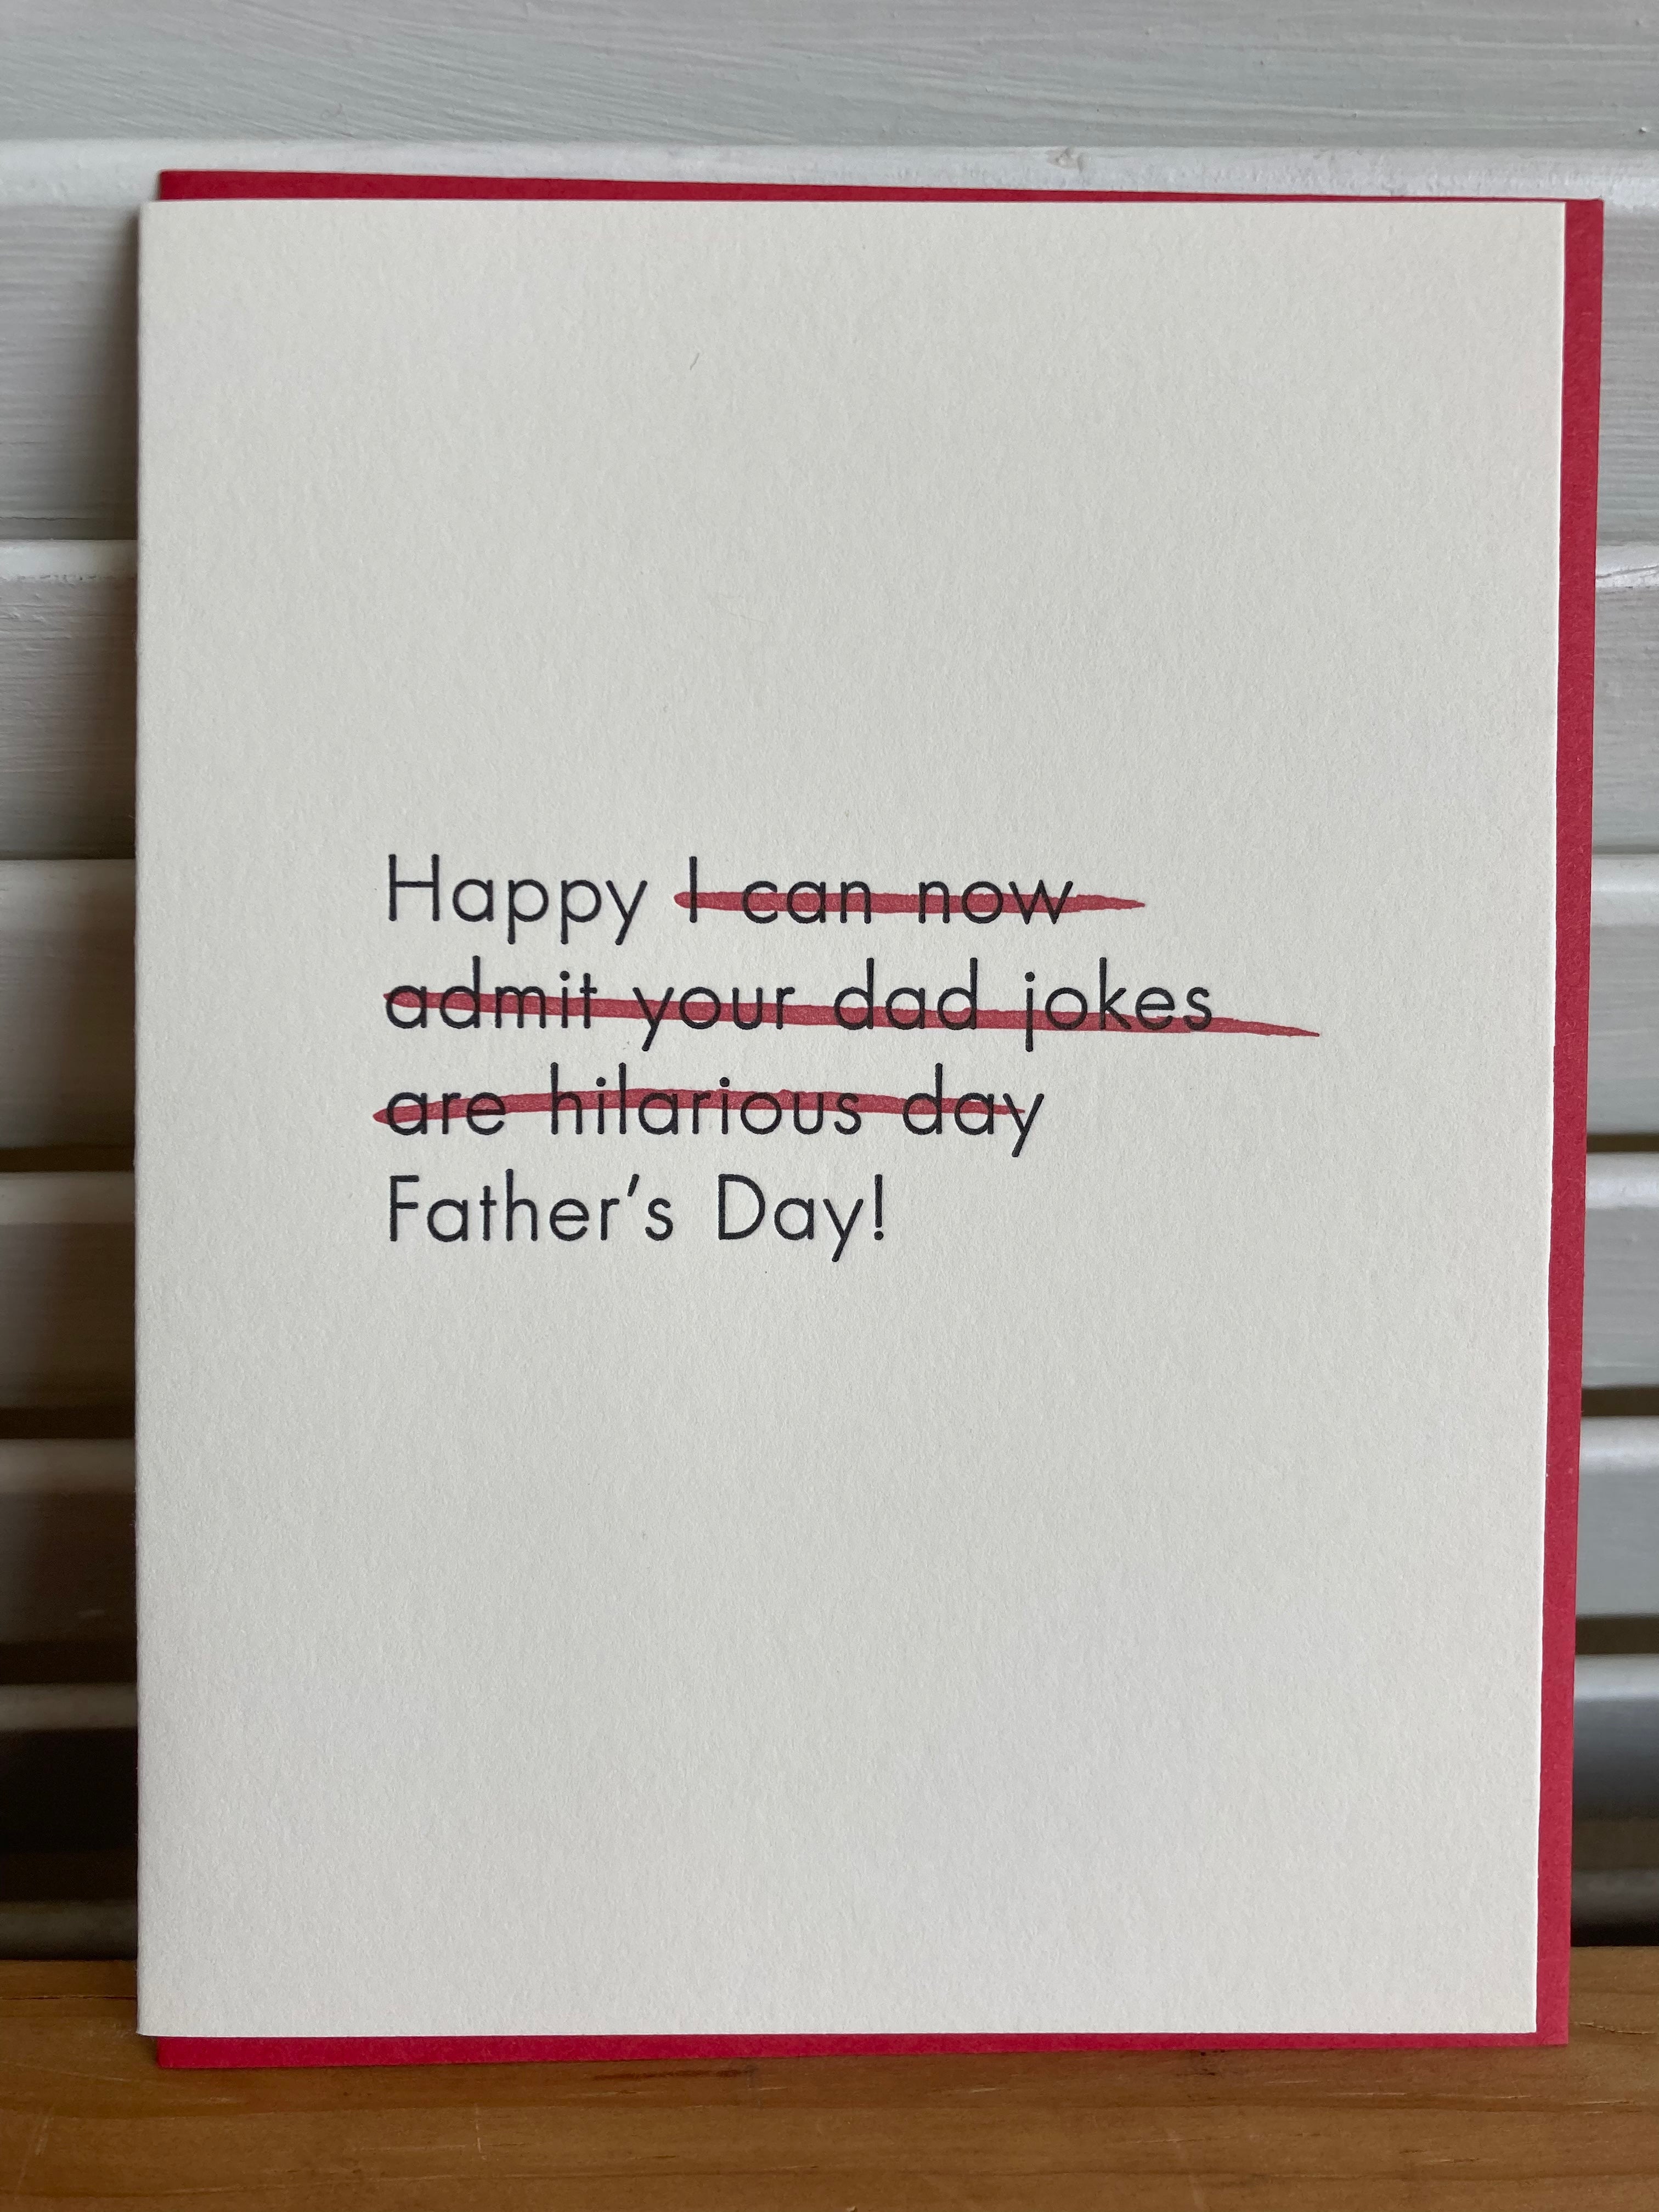 Happy I can now admit your dad jokes are hilarious day Father's Day card